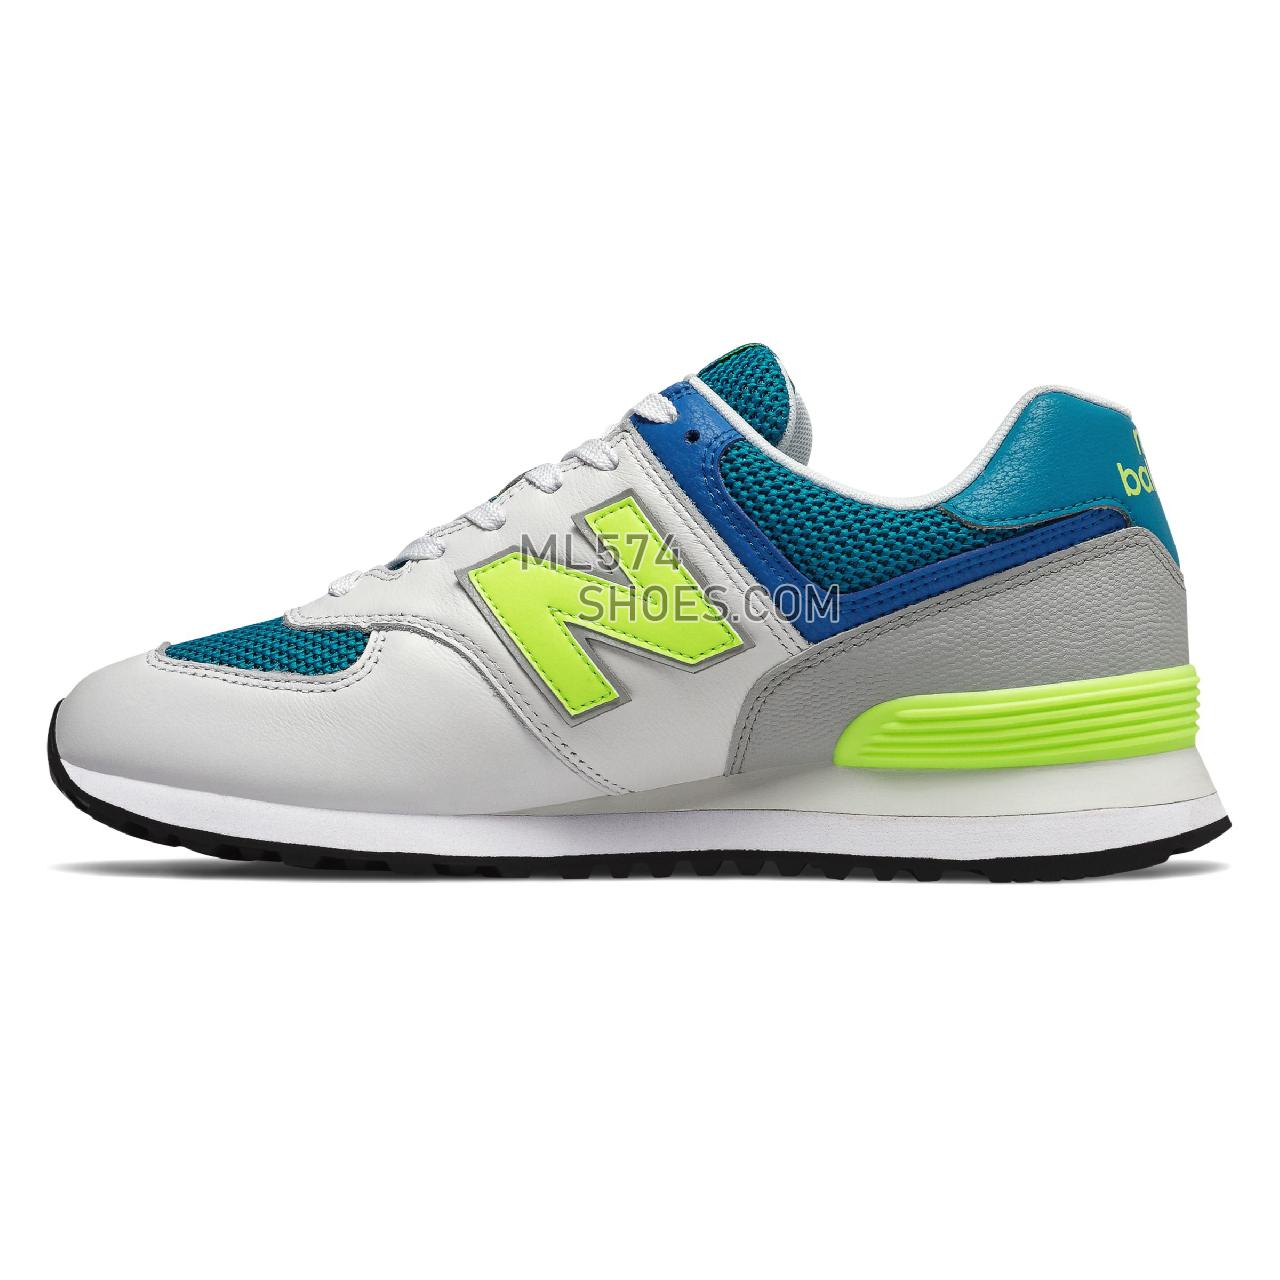 New Balance 574 - Men's Classic Sneakers - Deep Ozone Blue with Bleached Lime Glo - ML574PWB